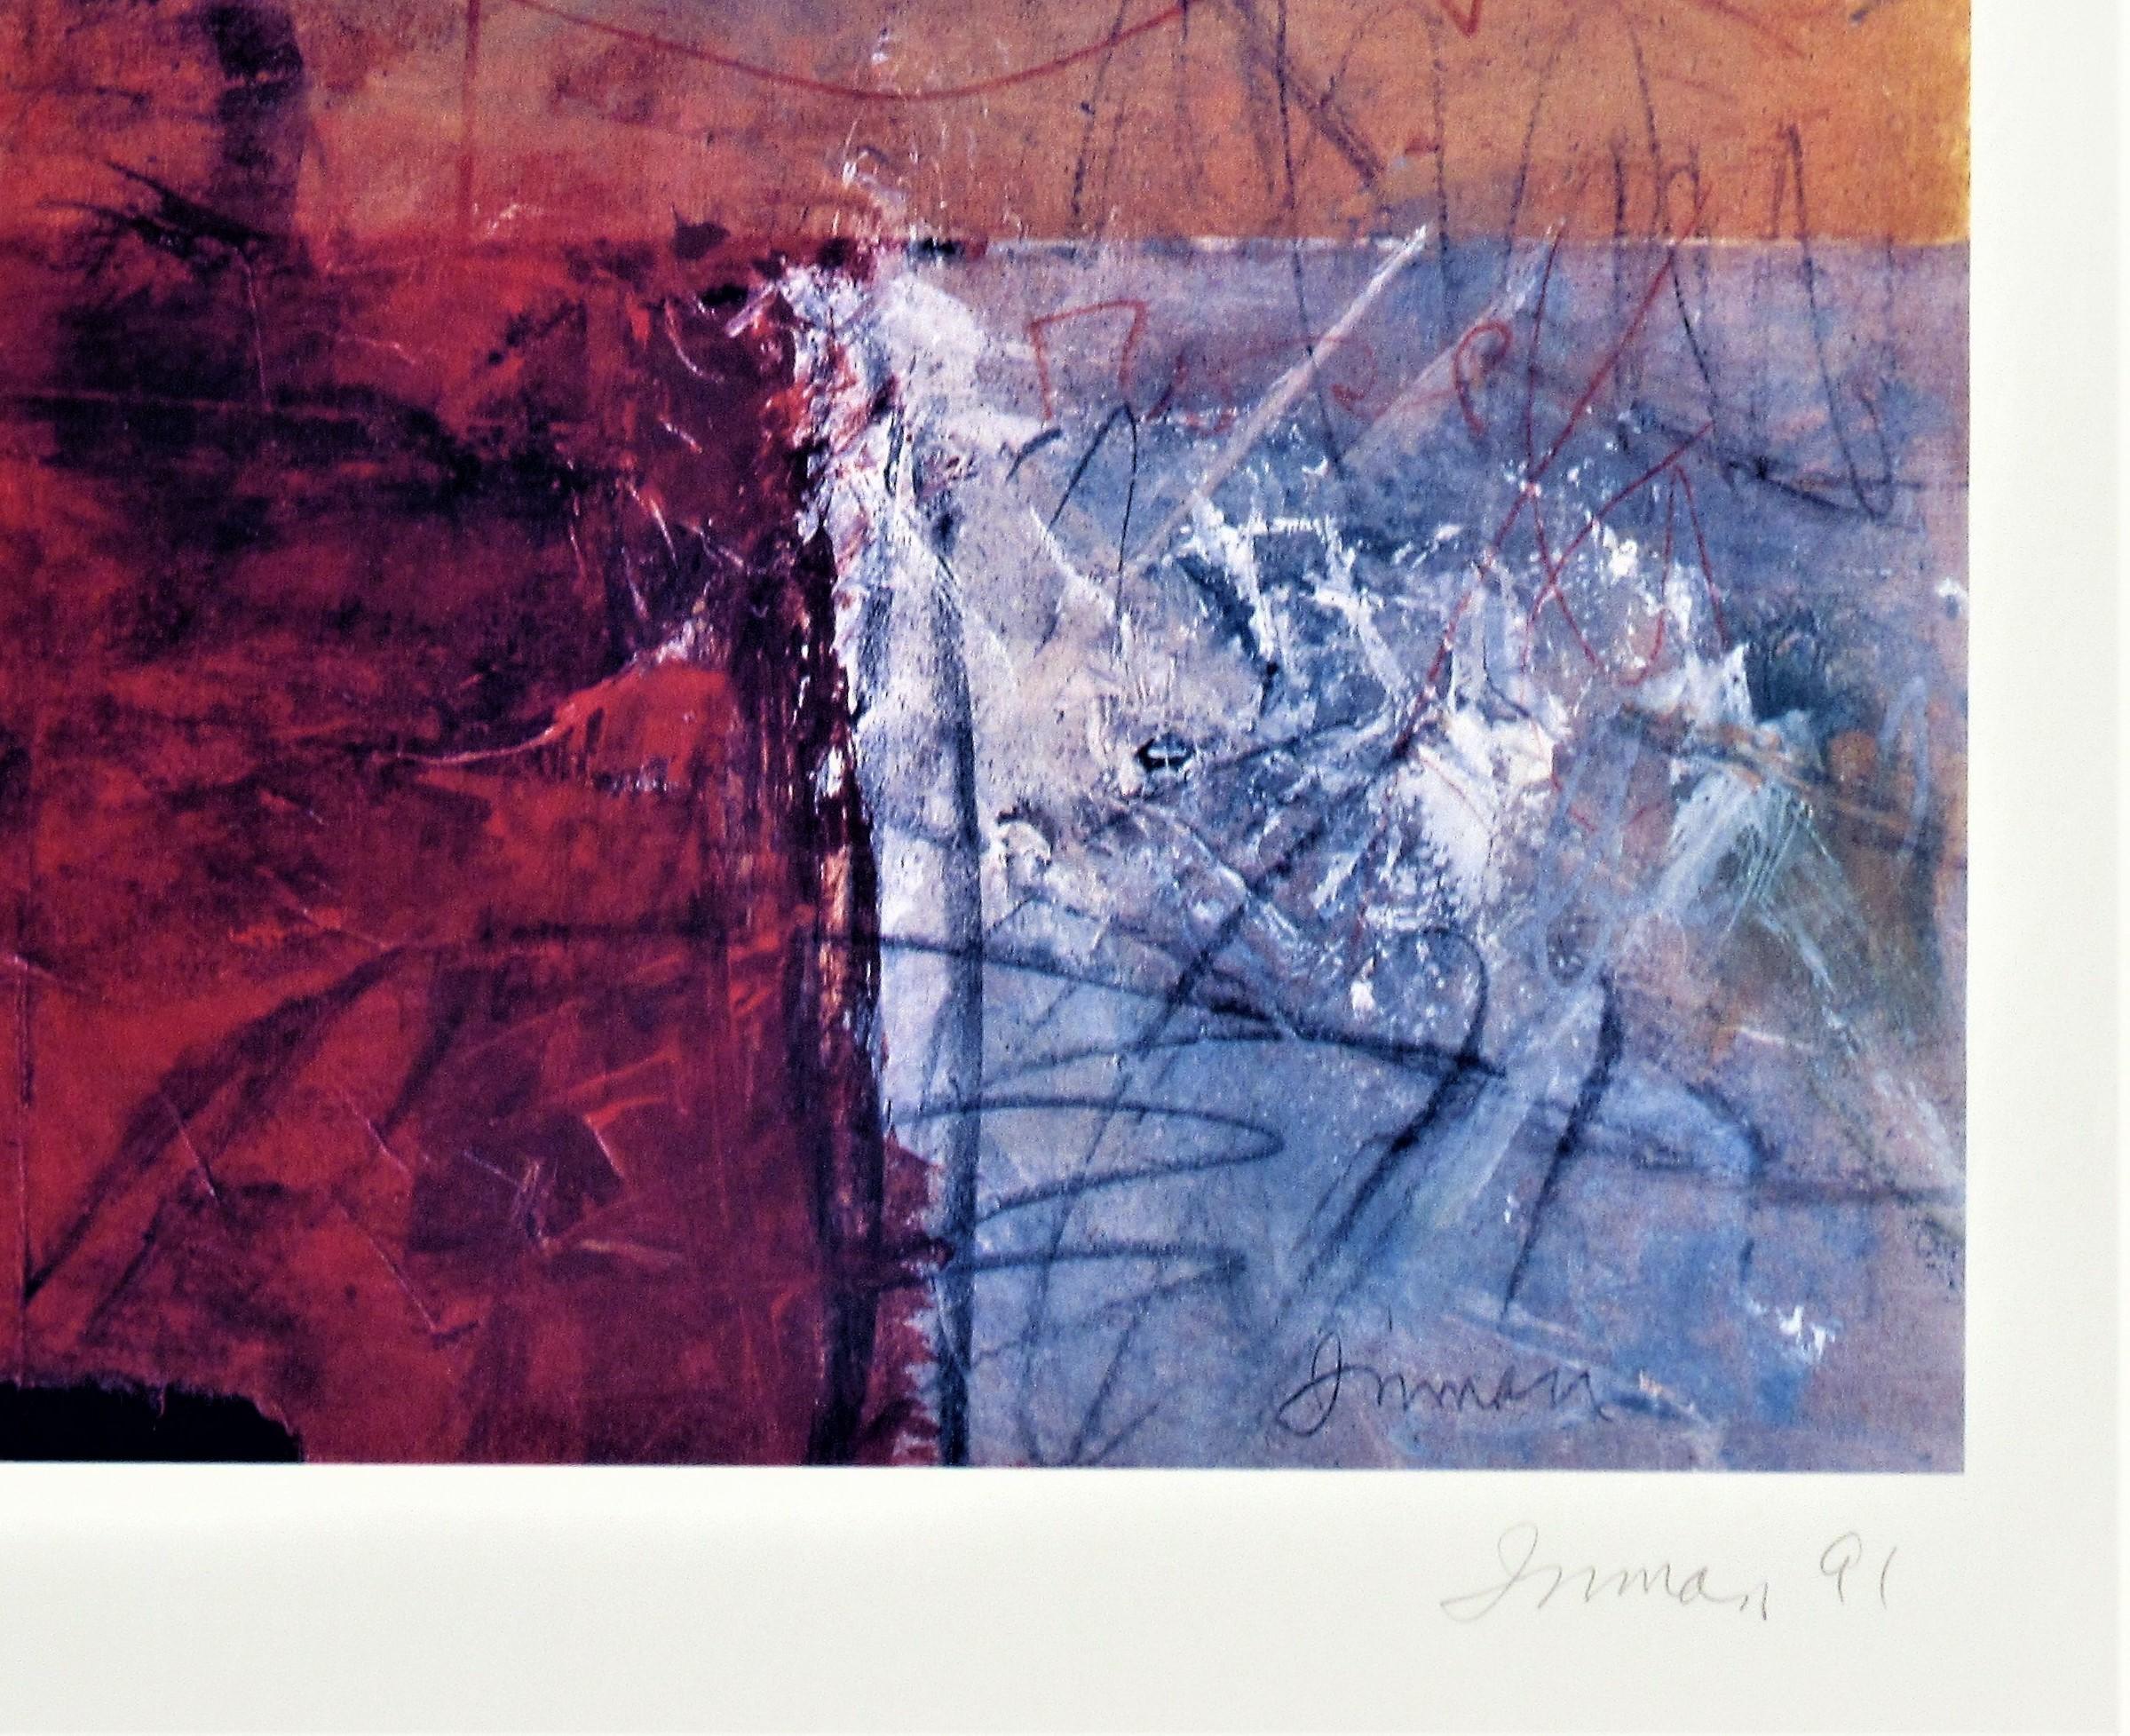 Soho #6 - Abstract Expressionist Print by Robert Inman